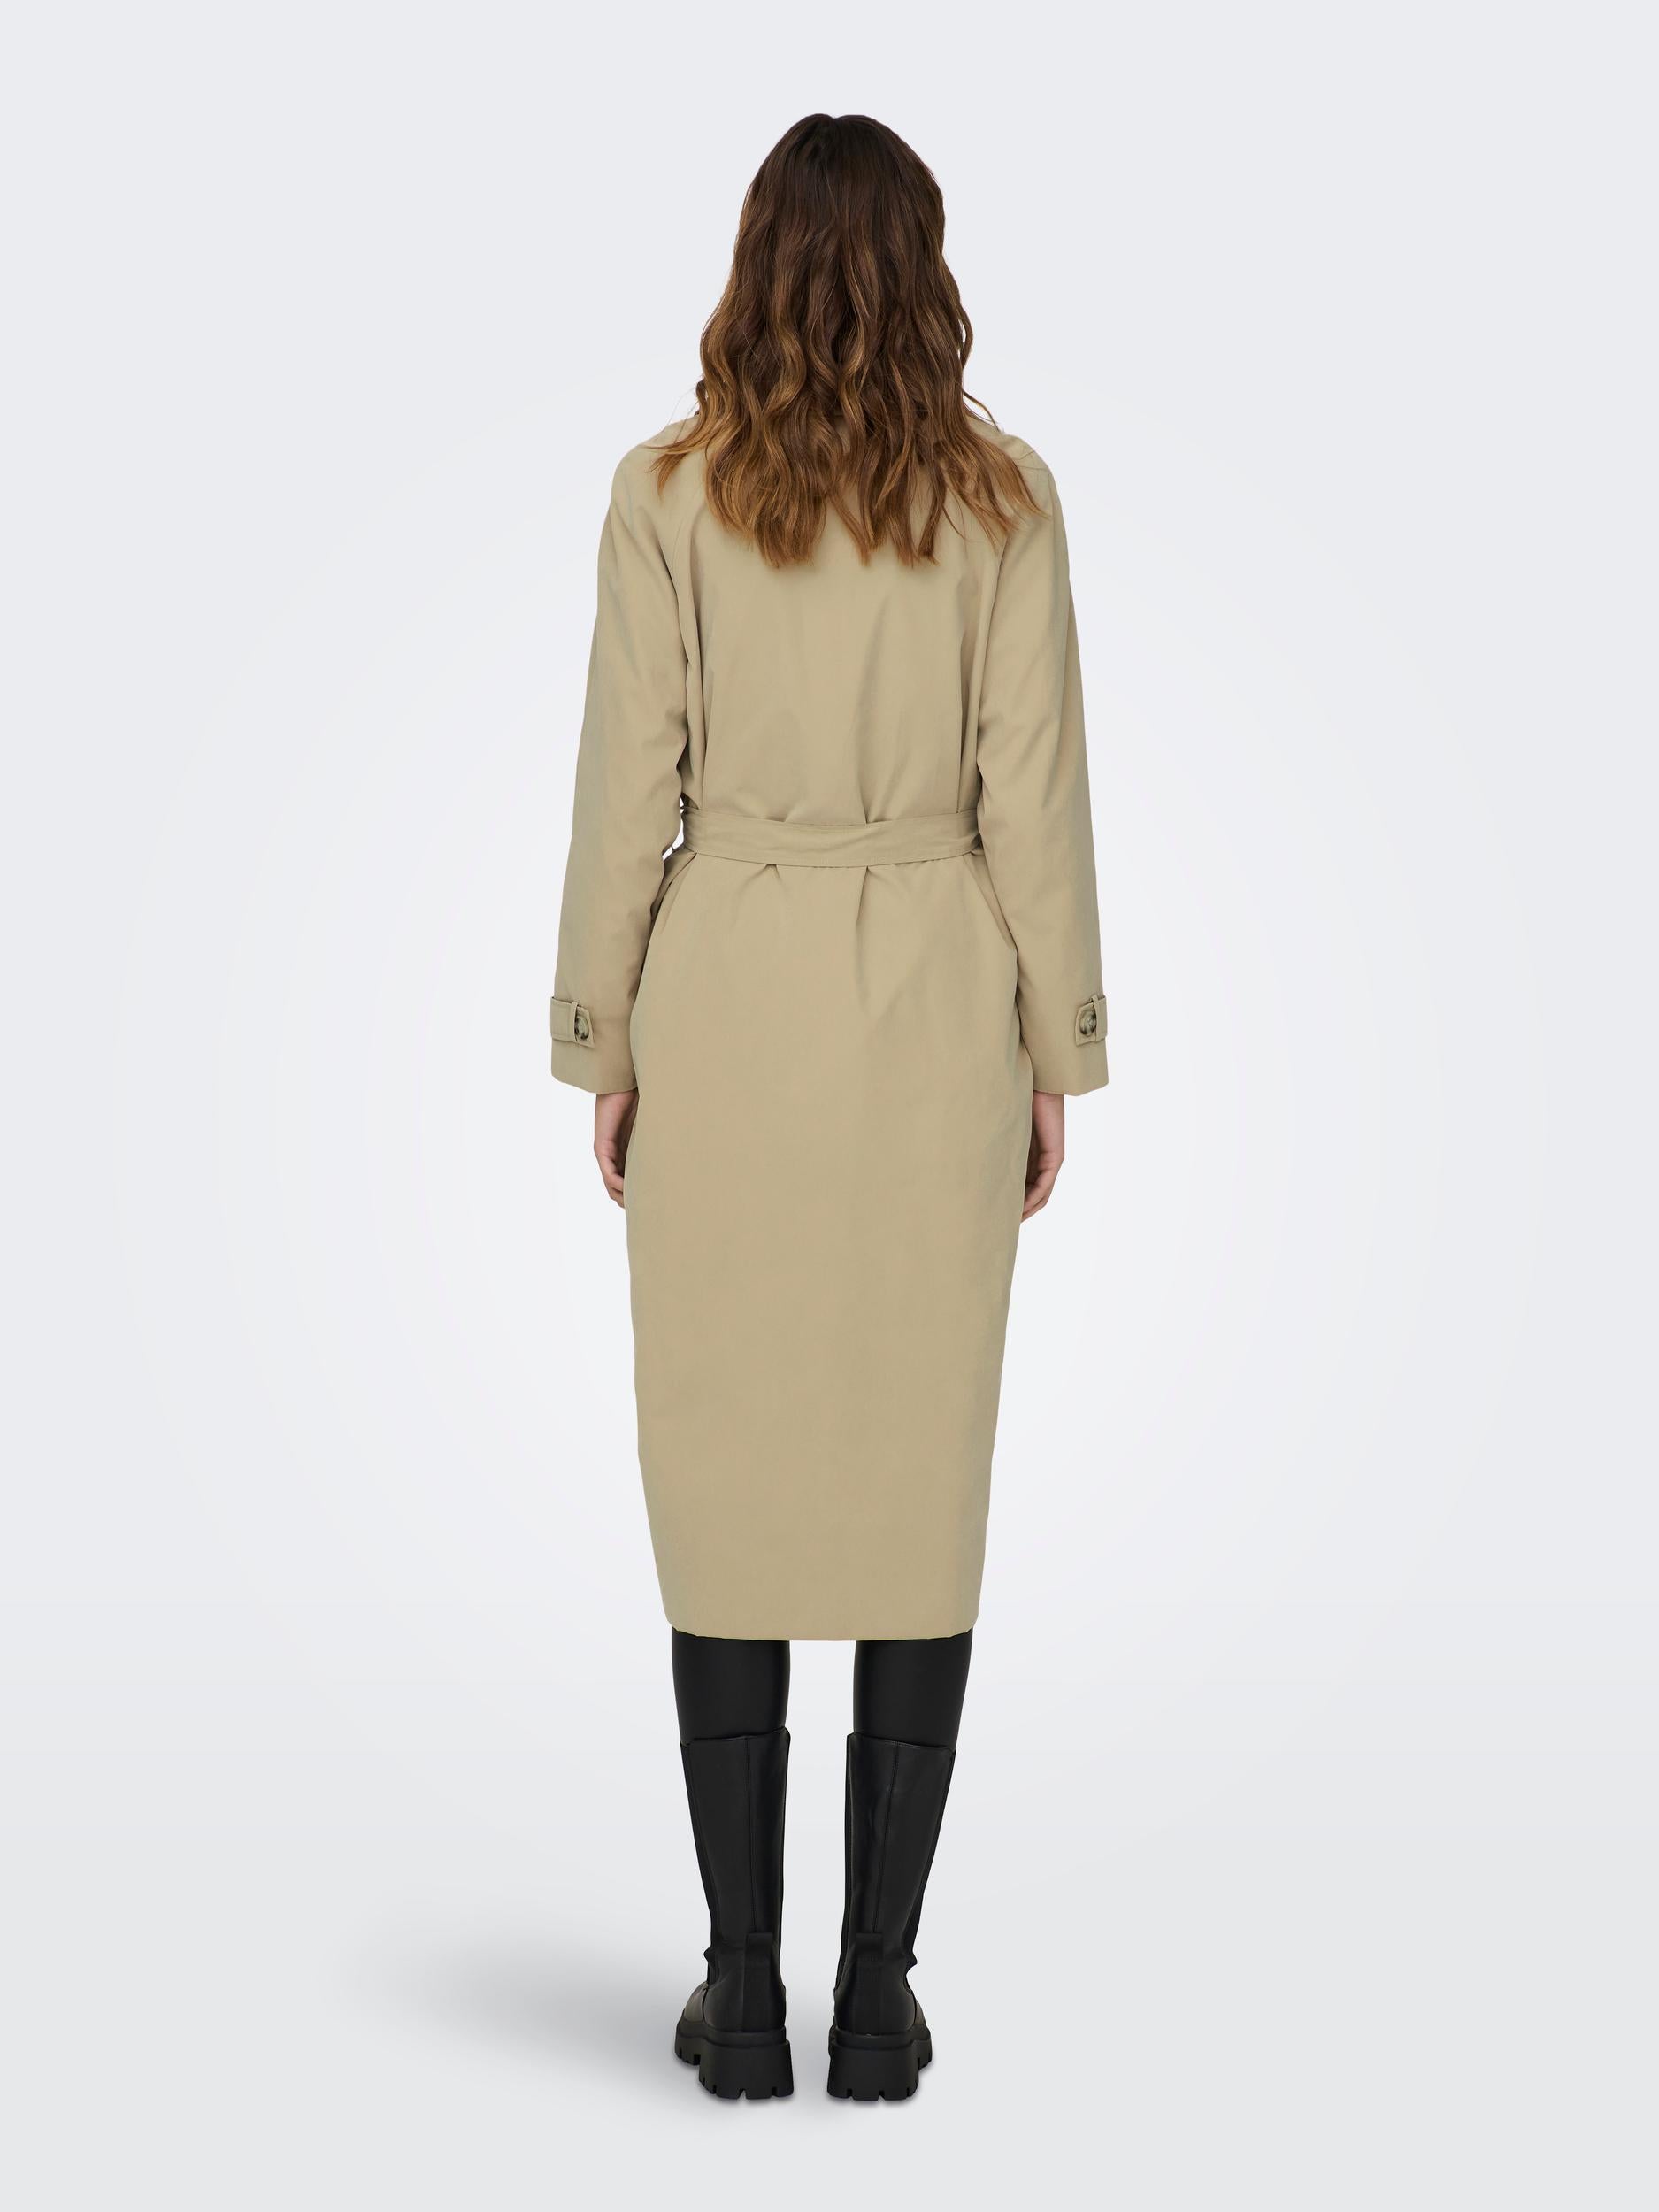 Panther trenchcoat sand - JDY